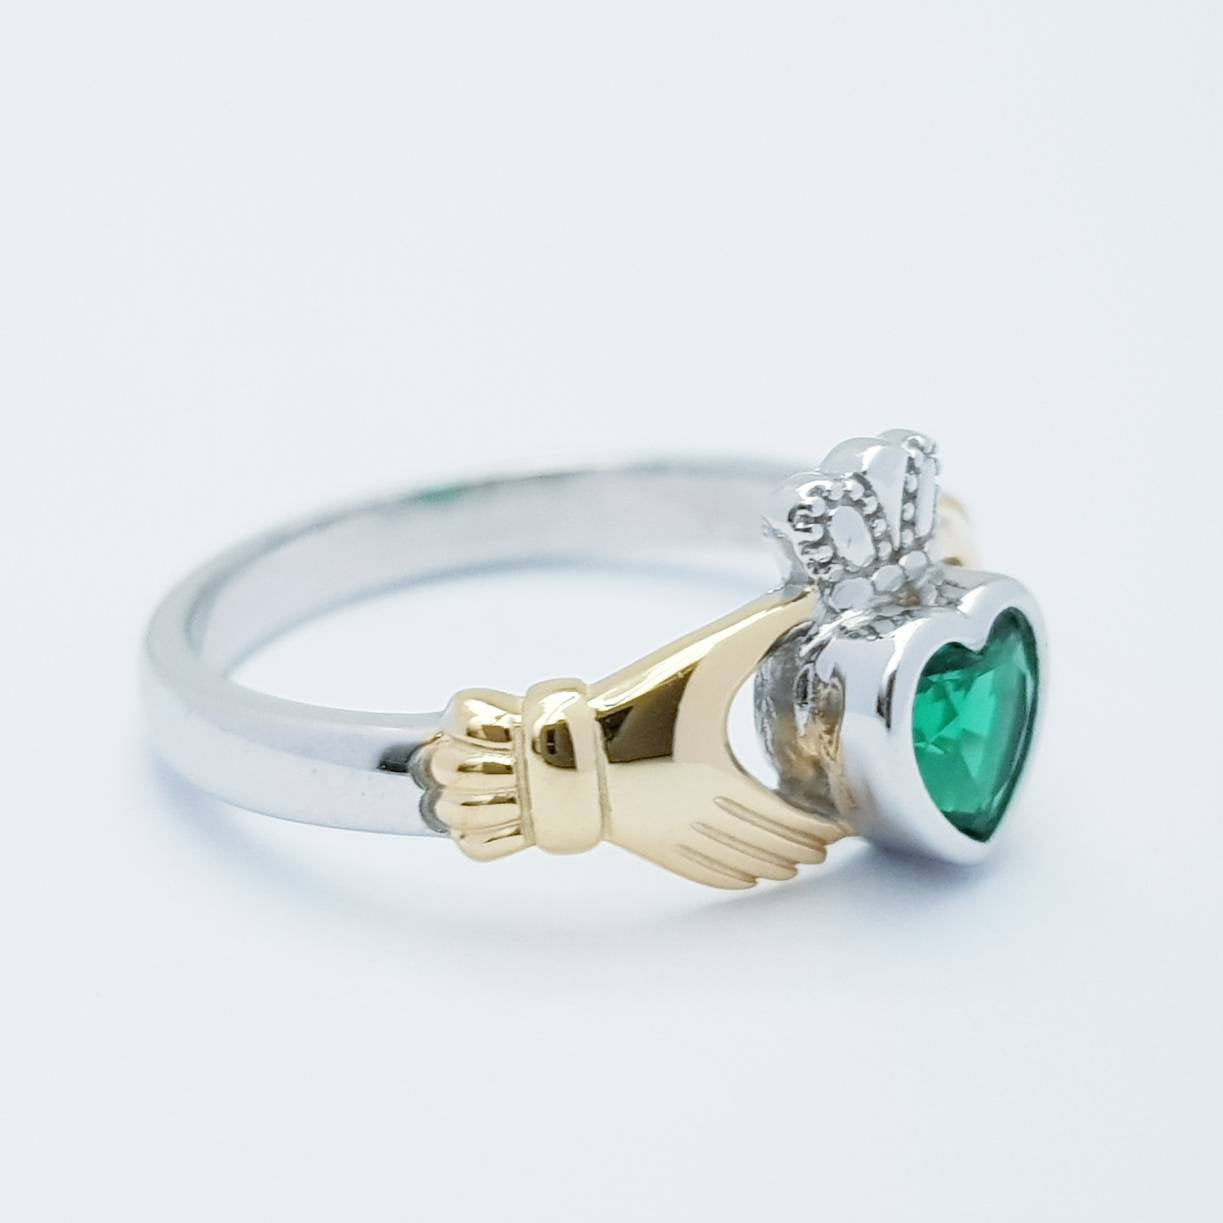 Sterling Silver Gold plated Claddagh ring set with emerald green stone, irish claddagh rings